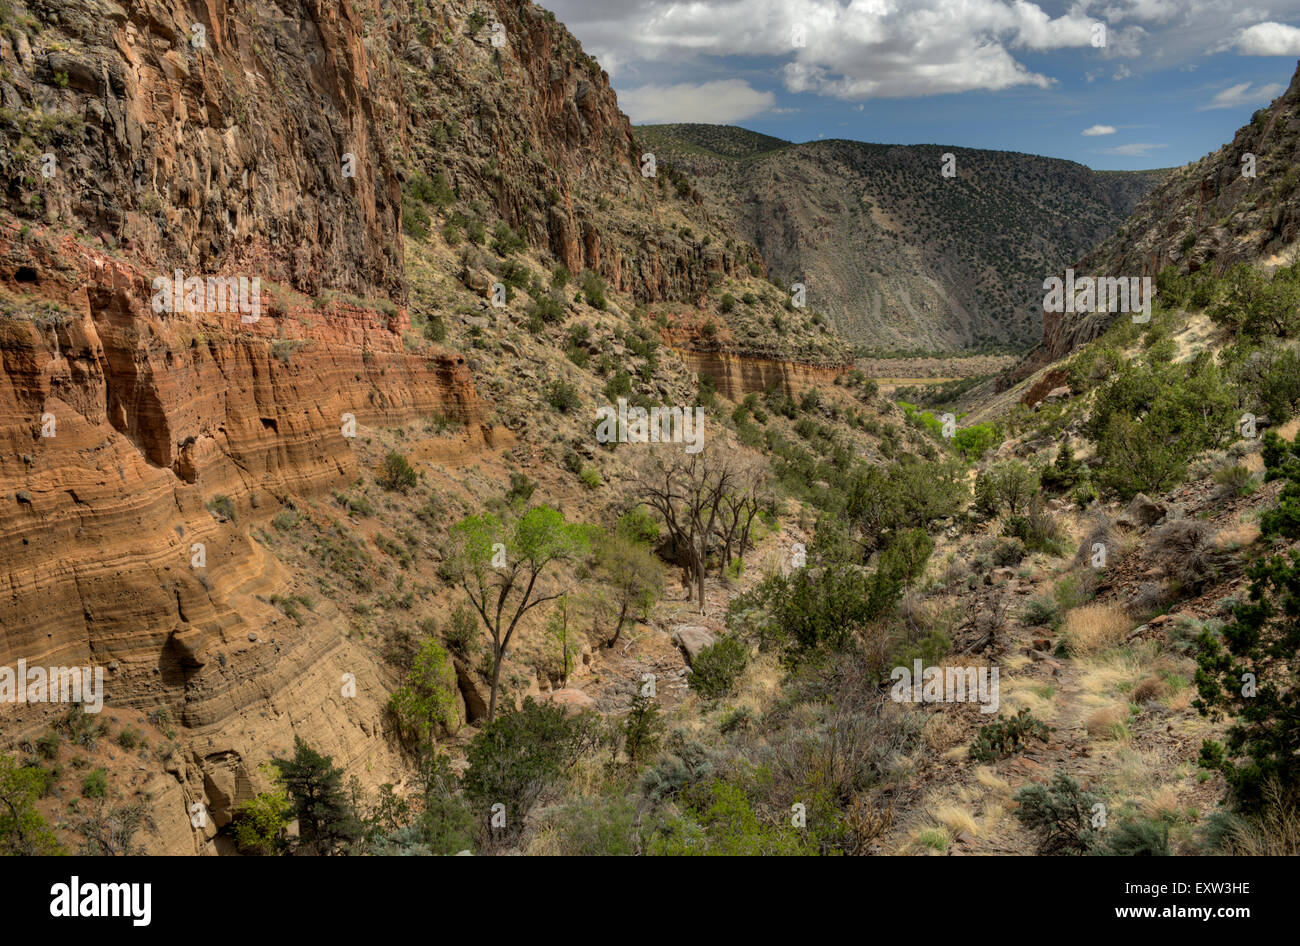 Lower Frijoles Canyon in the Bandelier National Monument, Los Alamos, New Mexico. Stock Photo